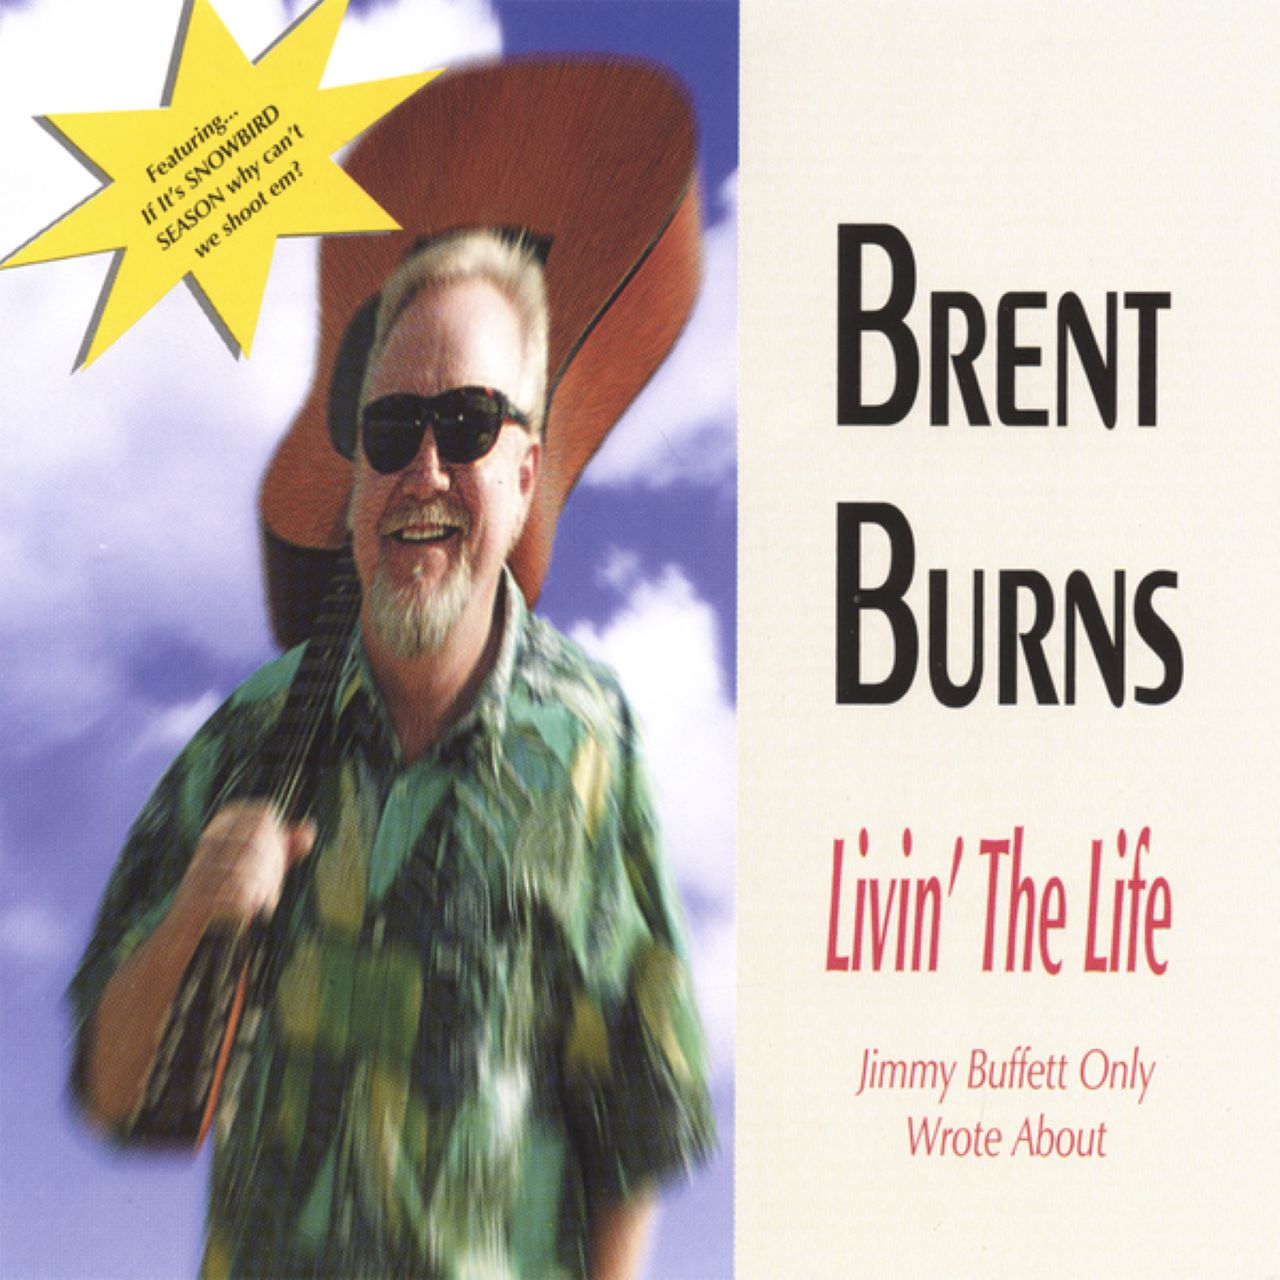 Brent Burns - Livin’ The Life Jimmy Buffett Only Wrote About cover album